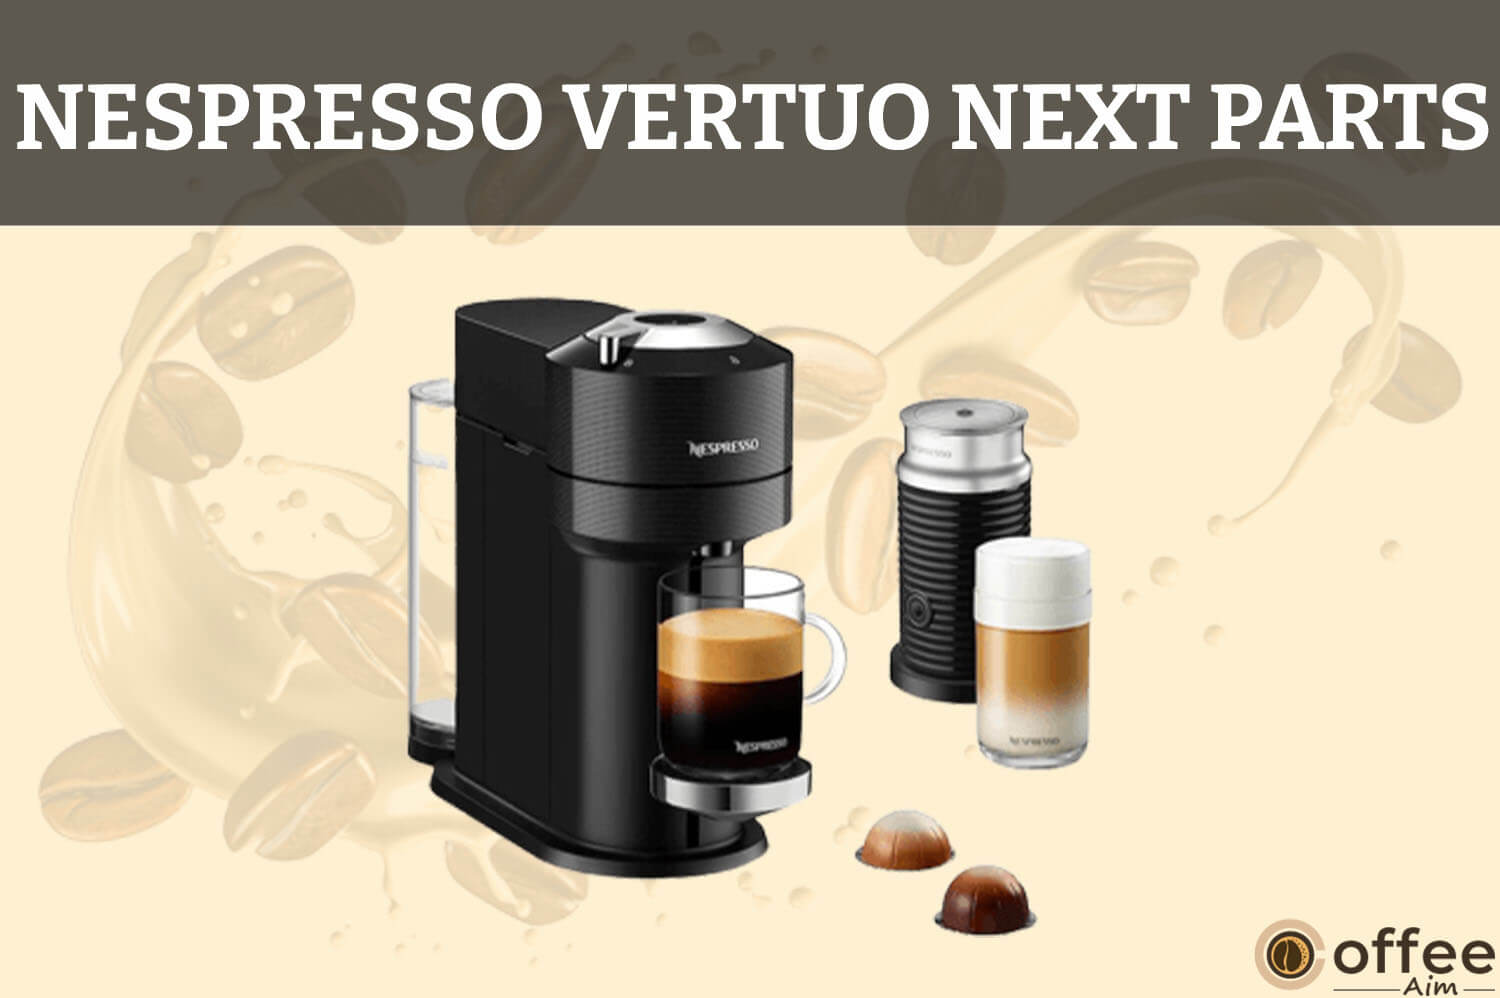 Featured image for the article "Nespresso Vertuo Next Parts"